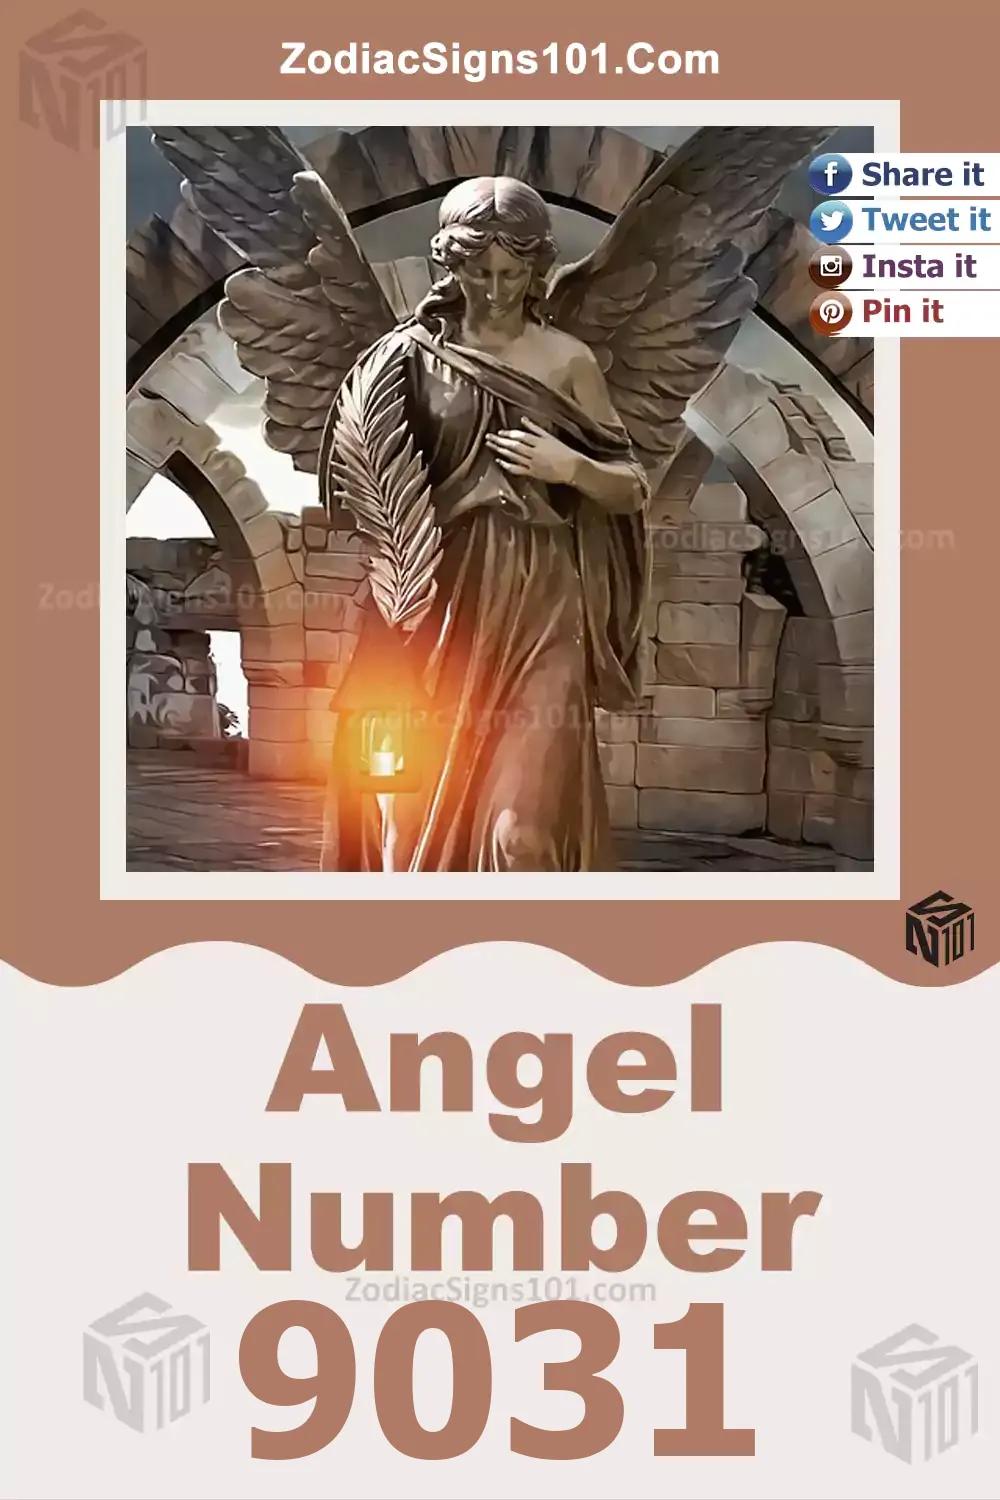 9031 Angel Number Meaning